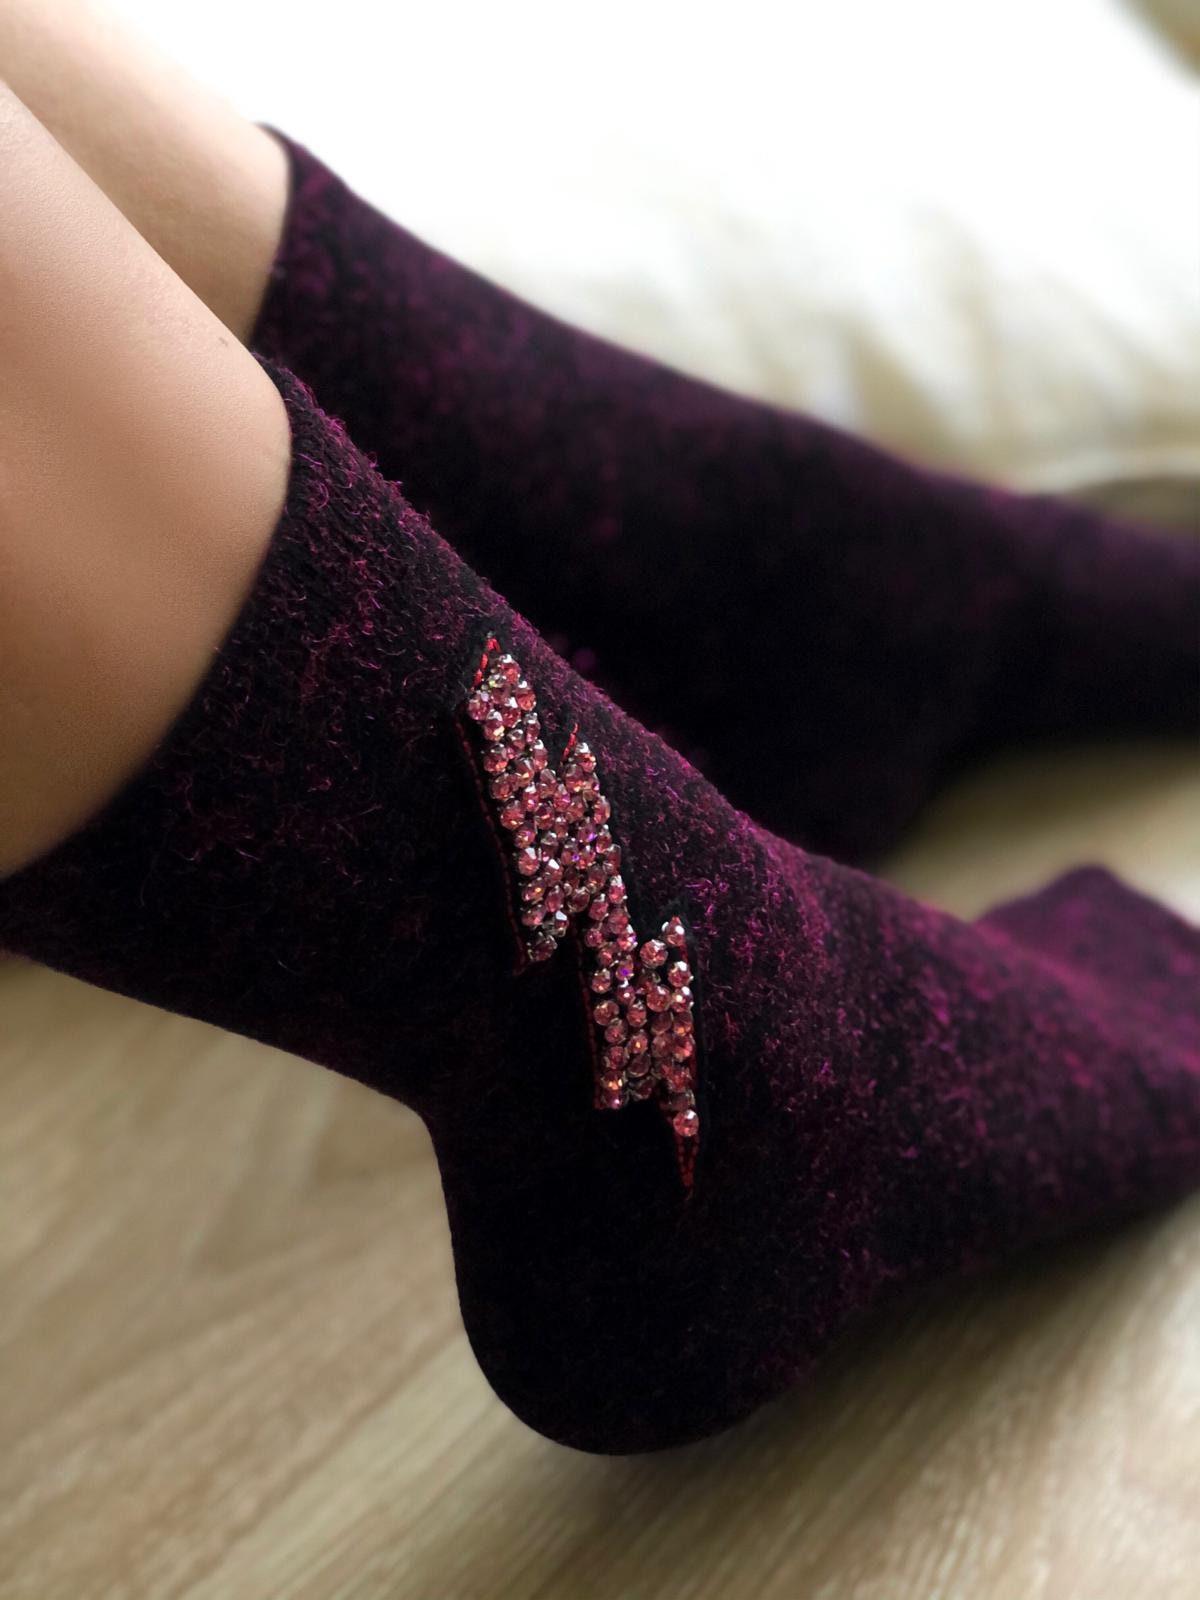 Charming Burgundy Handmade Electric Effect Socks with Dark Pink Embellishments and Pink Crystals - Trendy and Sparkling Cute Socks available at Moyoni Design